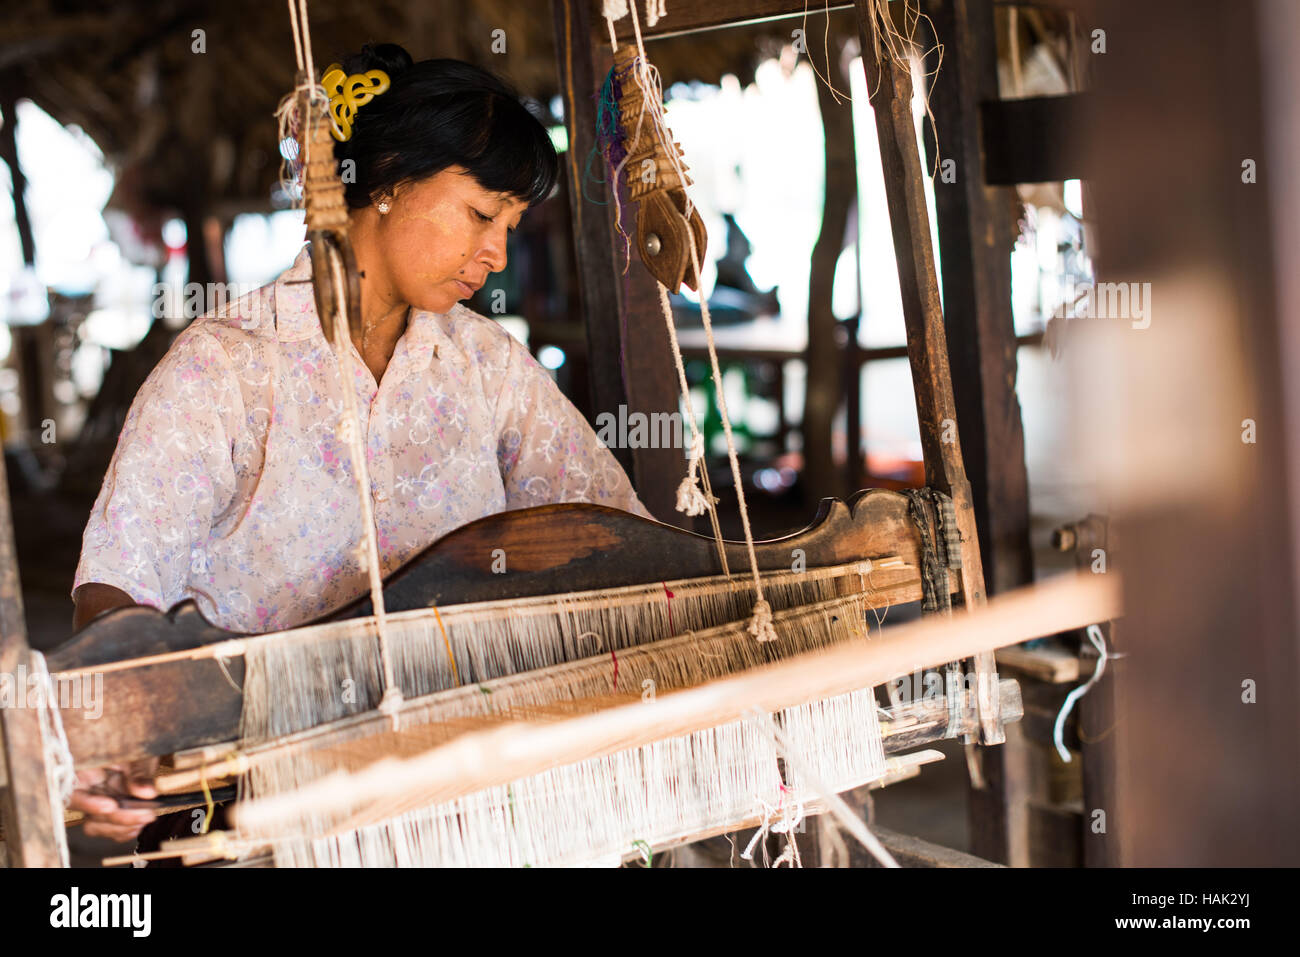 BAGAN, Myanmar - A woman uses a traditional loom to weave textiles in Minnanthu Village in Bagan, Myanmar. Set amidst the archeological ruins of the Plain of Bagan, the tiny Minnanthu Village retains the traditional way of life. Stock Photo